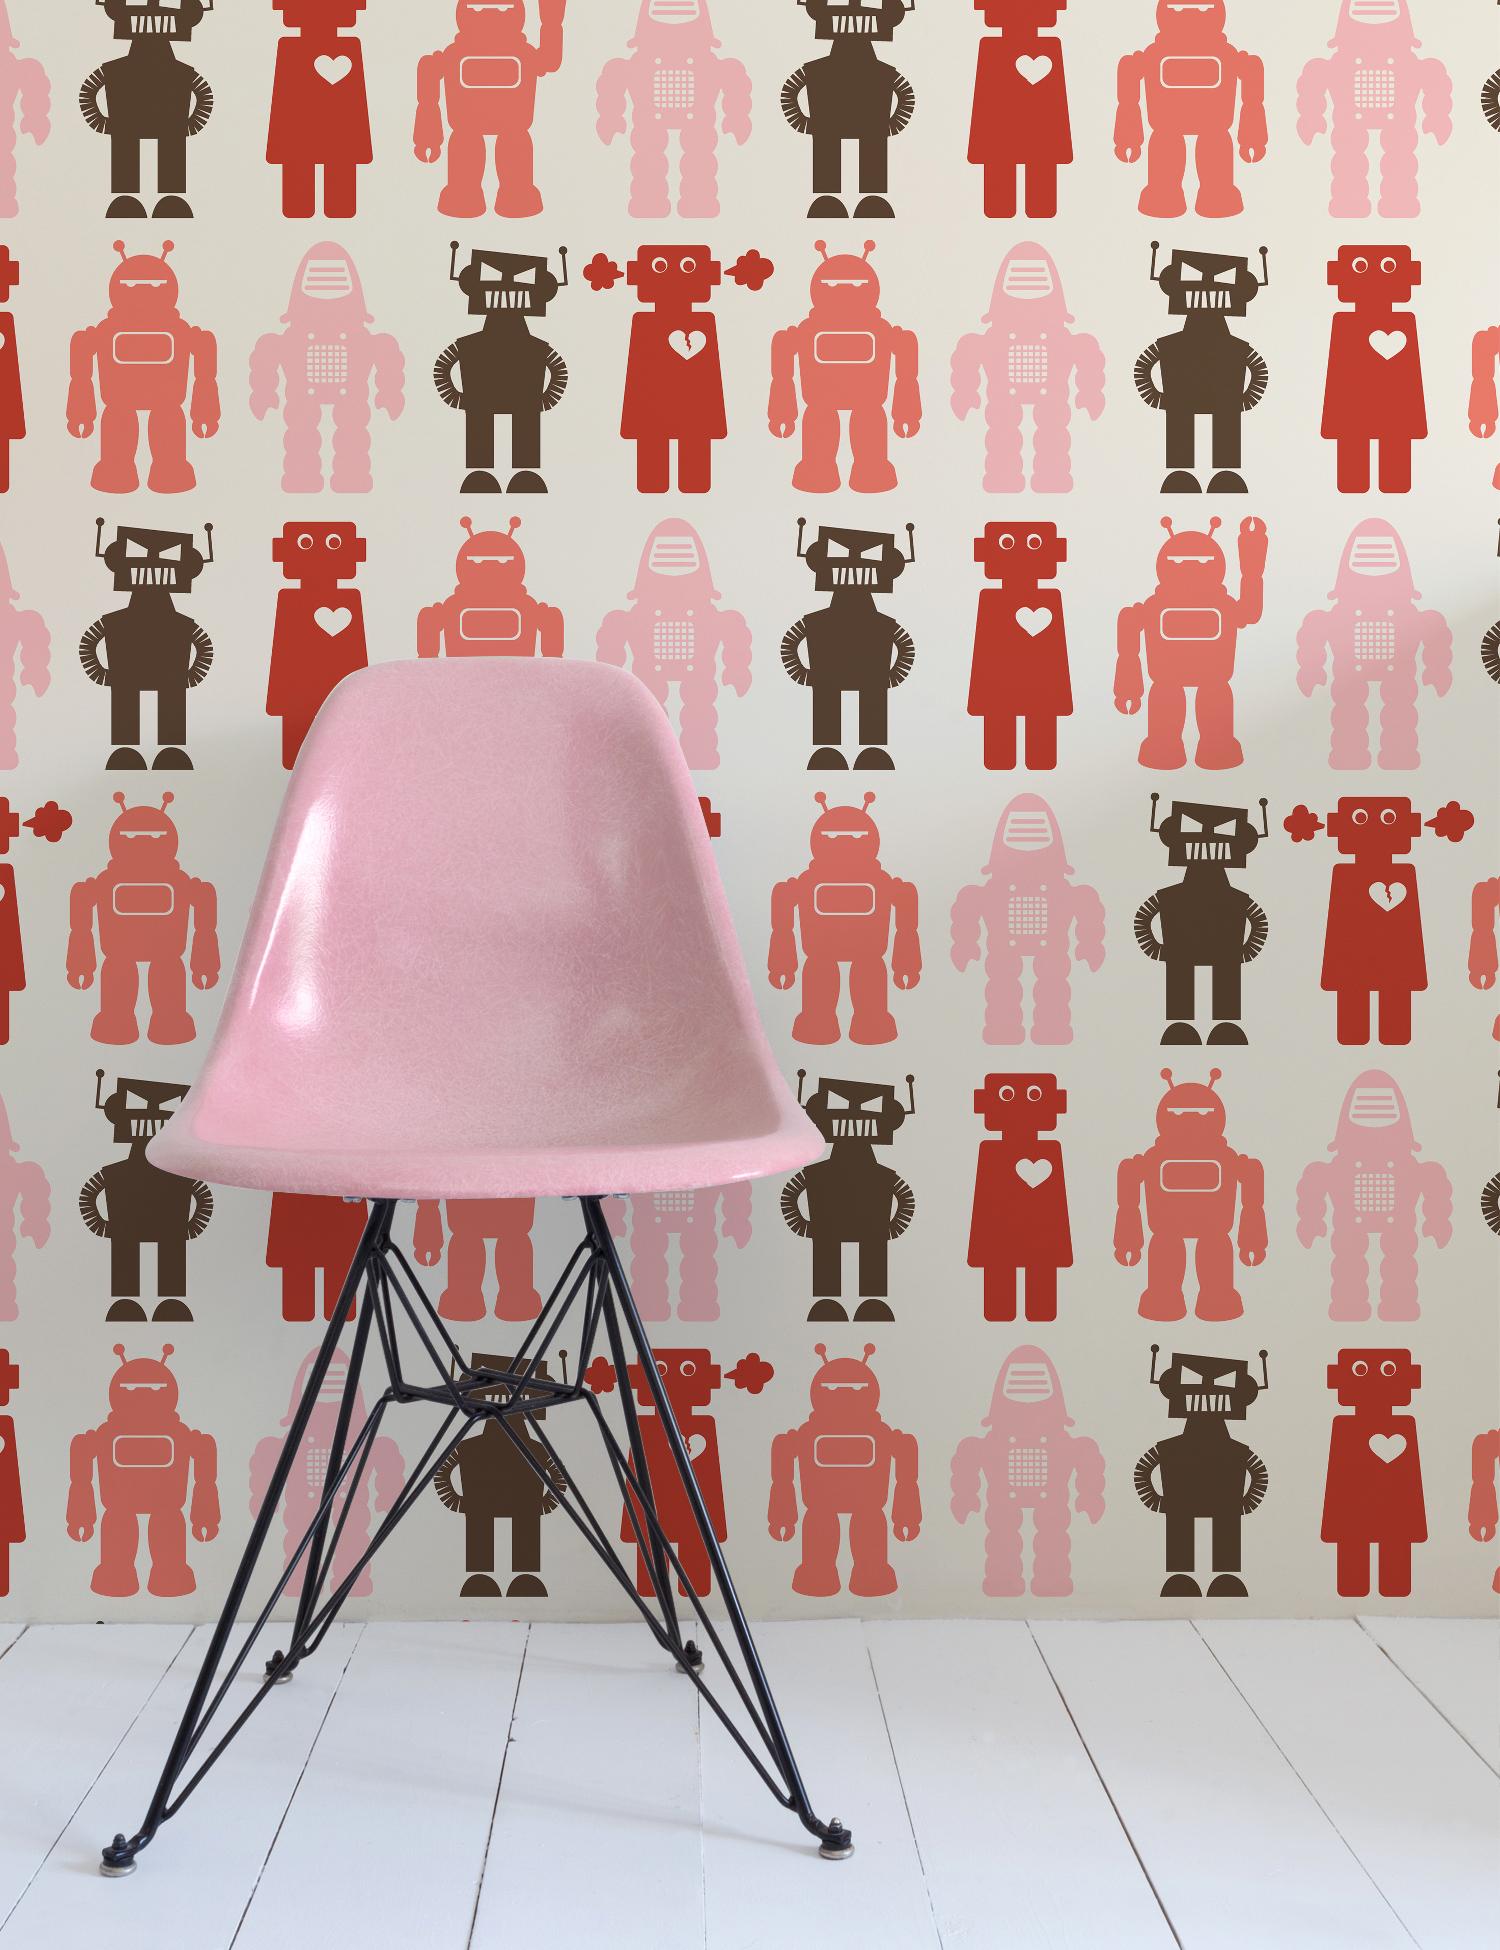 This hand-printed wall-covering with Aimée's signature Robots is he perfect wallpaper for your child's nursery, bedroom or playroom!

Samples are available for $18 including US shipping, please message us to purchase.

Printing: Screen-printed by